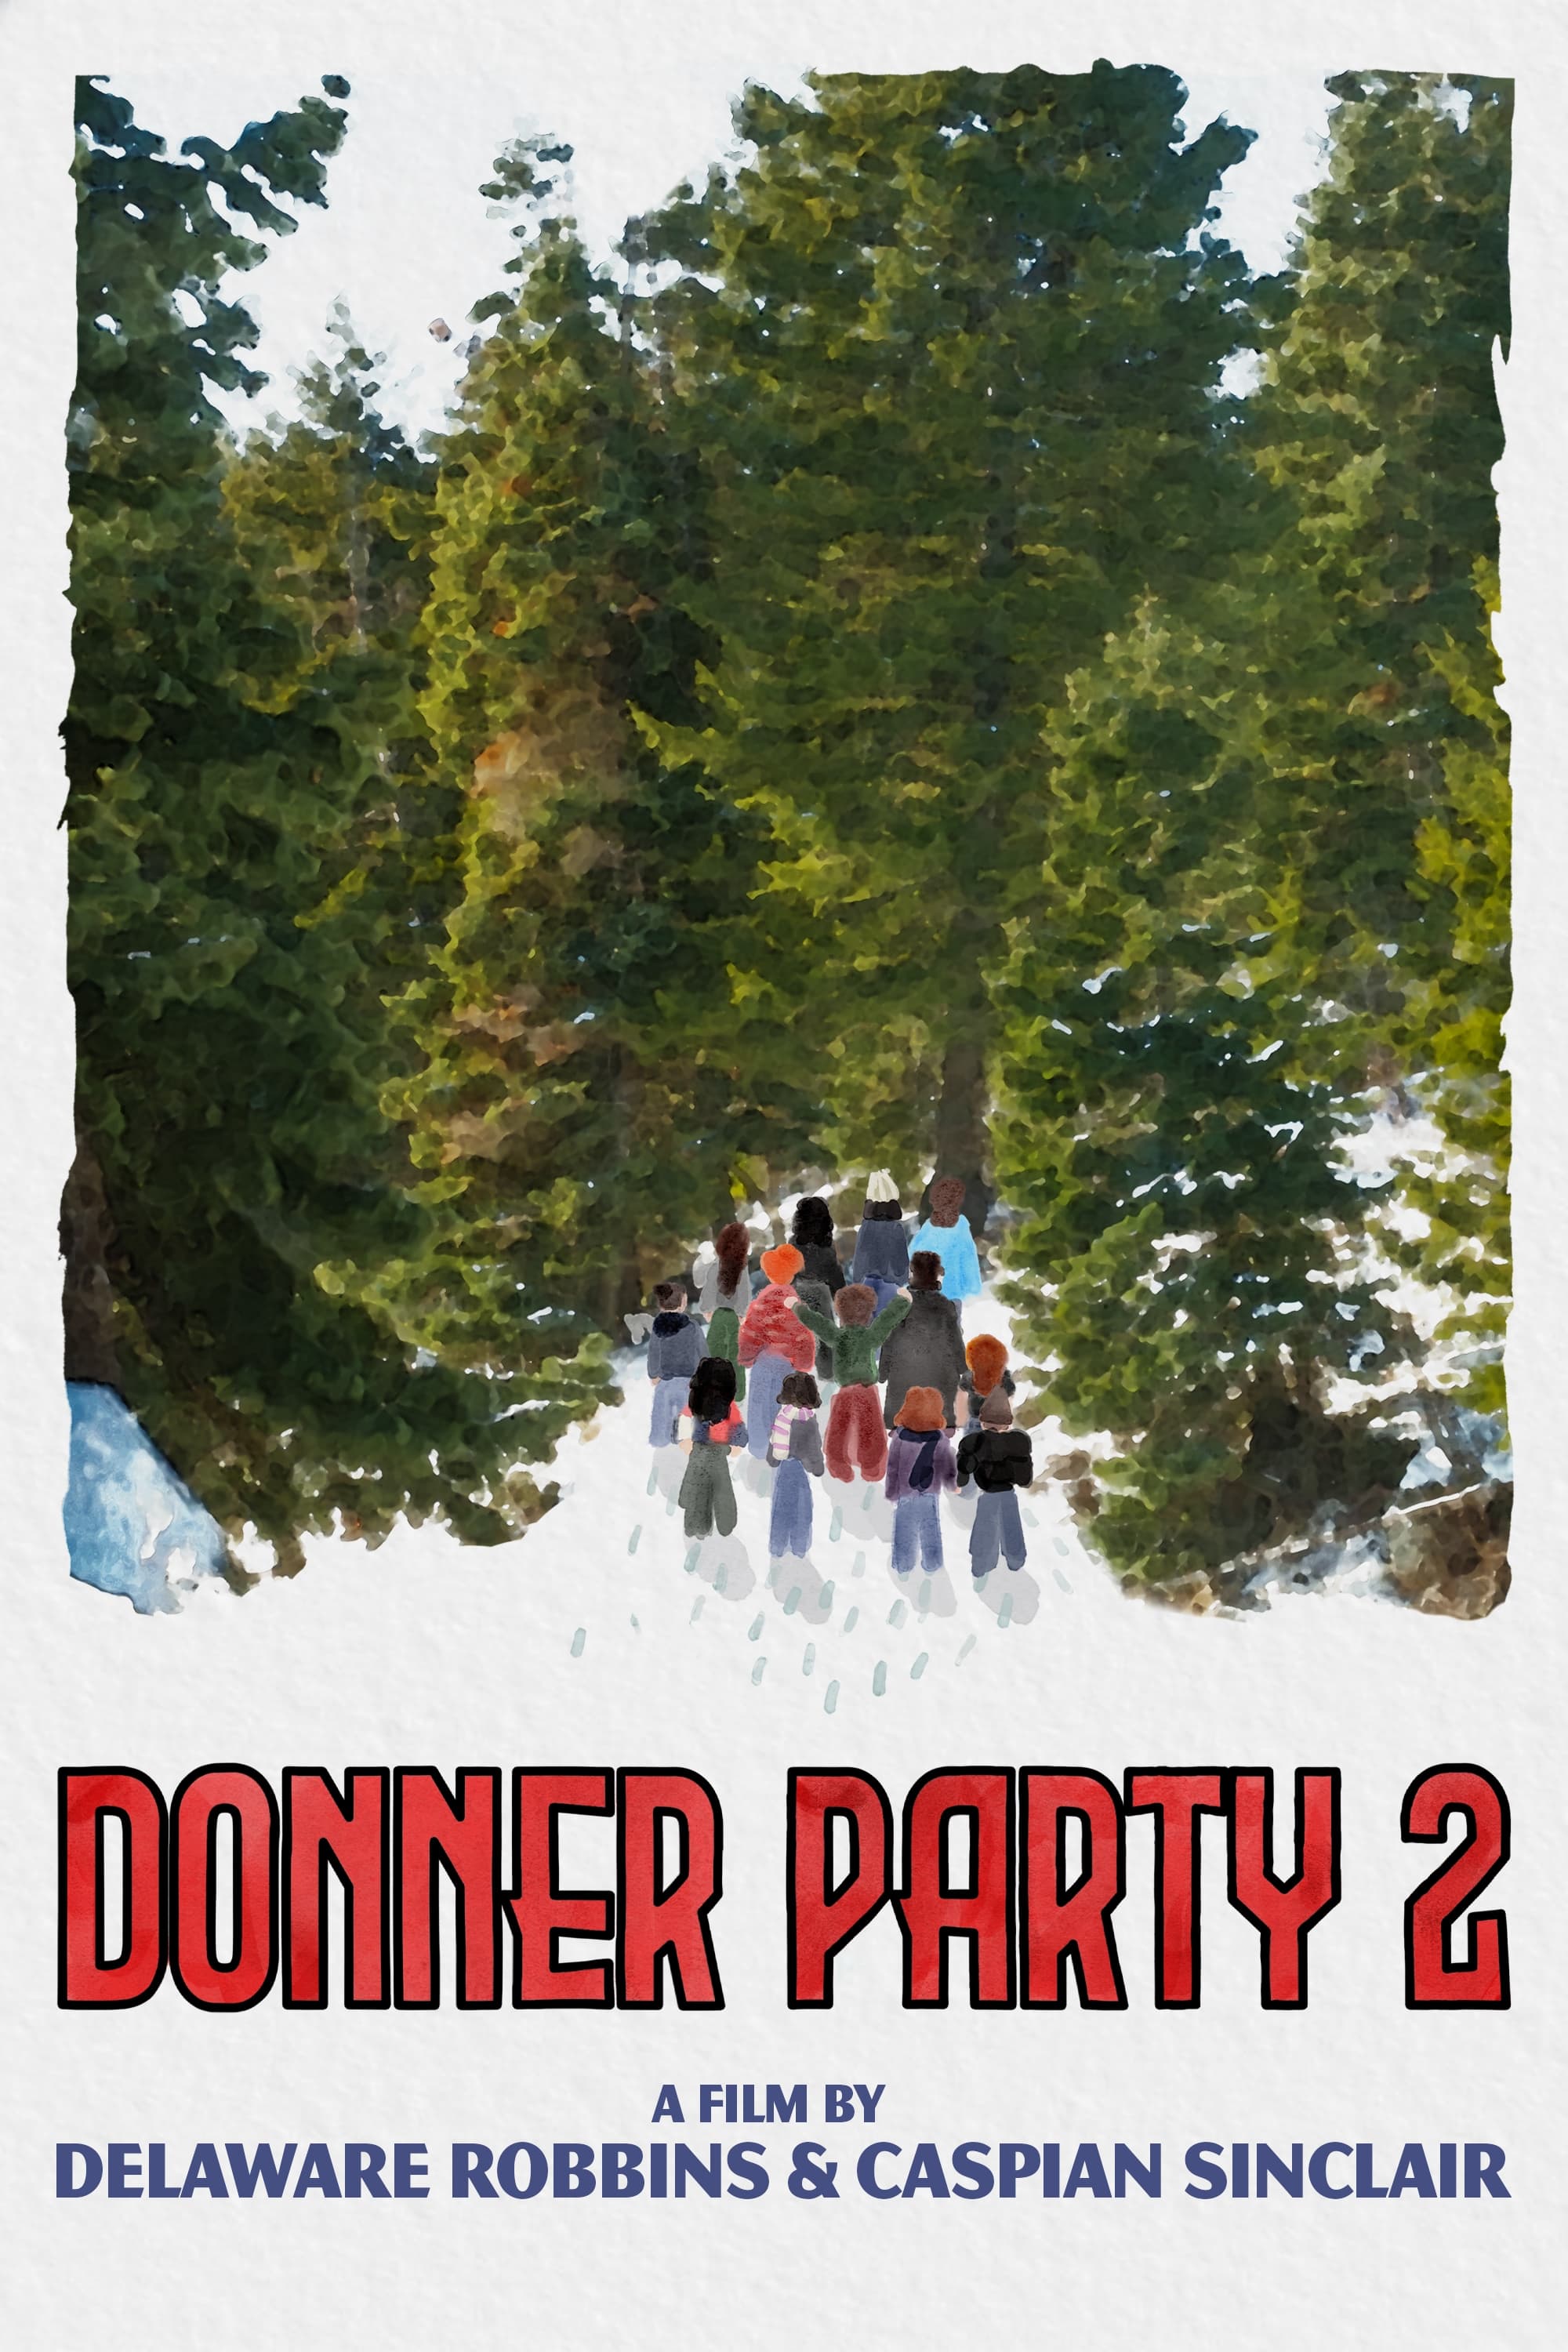 Donner Party 2